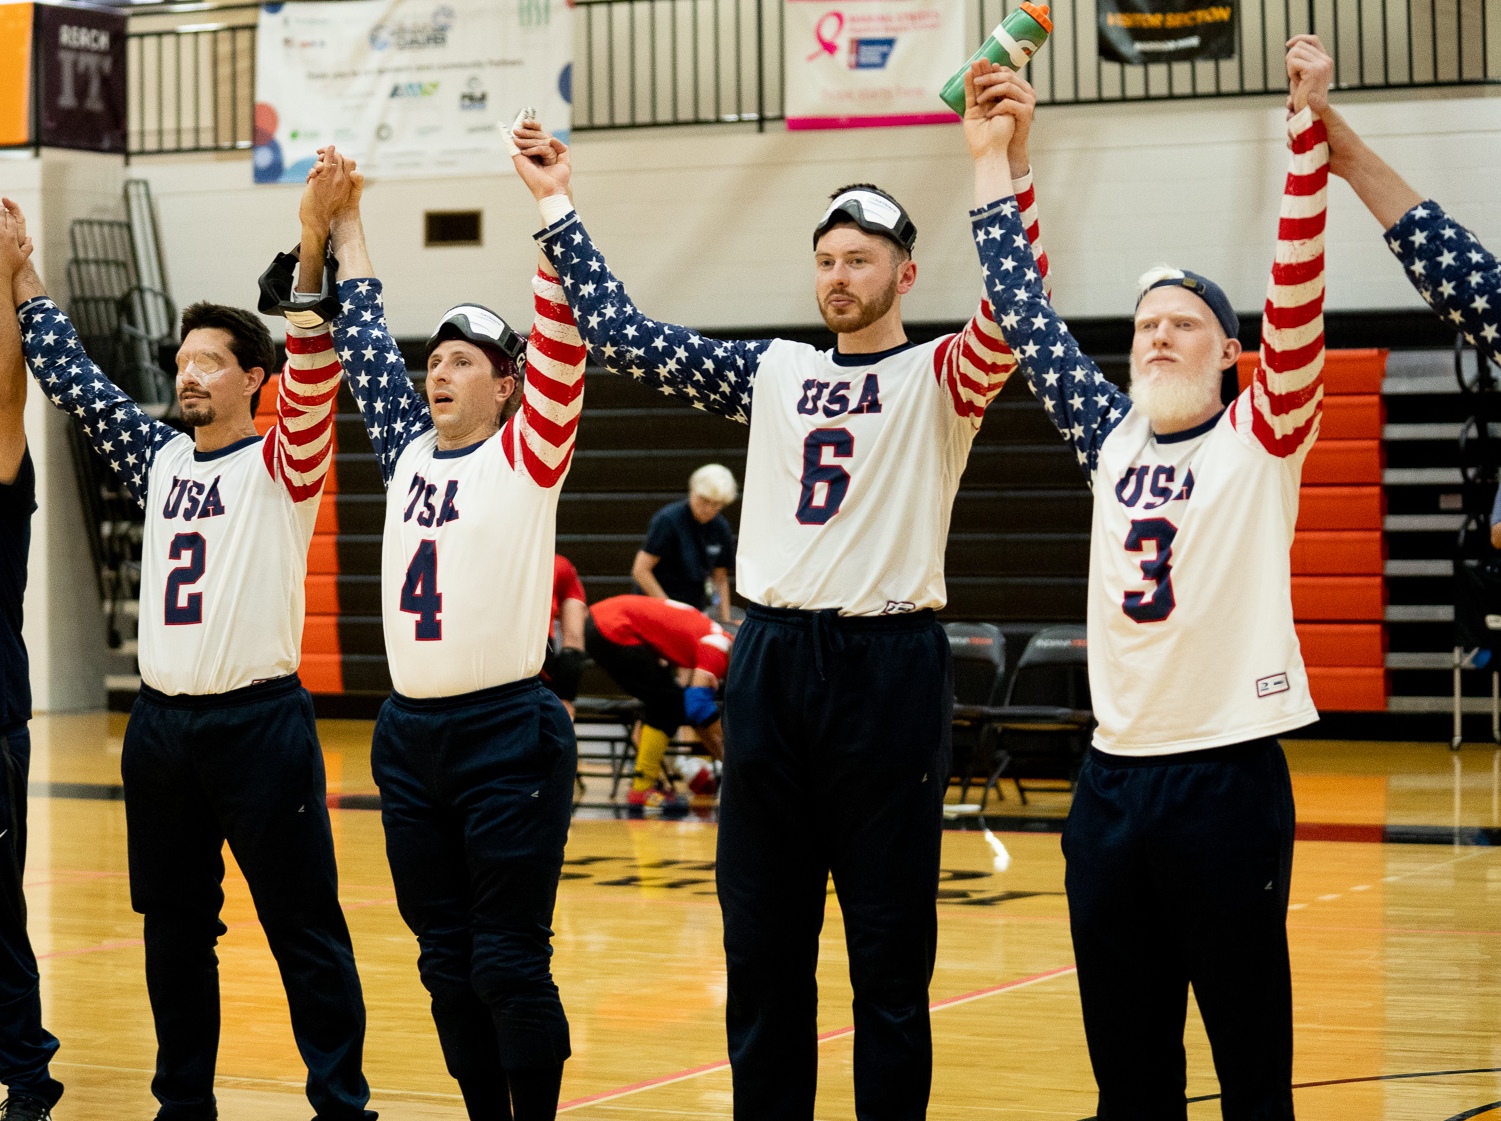 Wearing a white #3 USA jersey at far right, Josh Welborn raises his arms together with teammates Calahan Young, John Kusku and Tyler Merren after a win at the 2019 IBSA Goalball International Qualifier in Fort Wayne, Indiana.